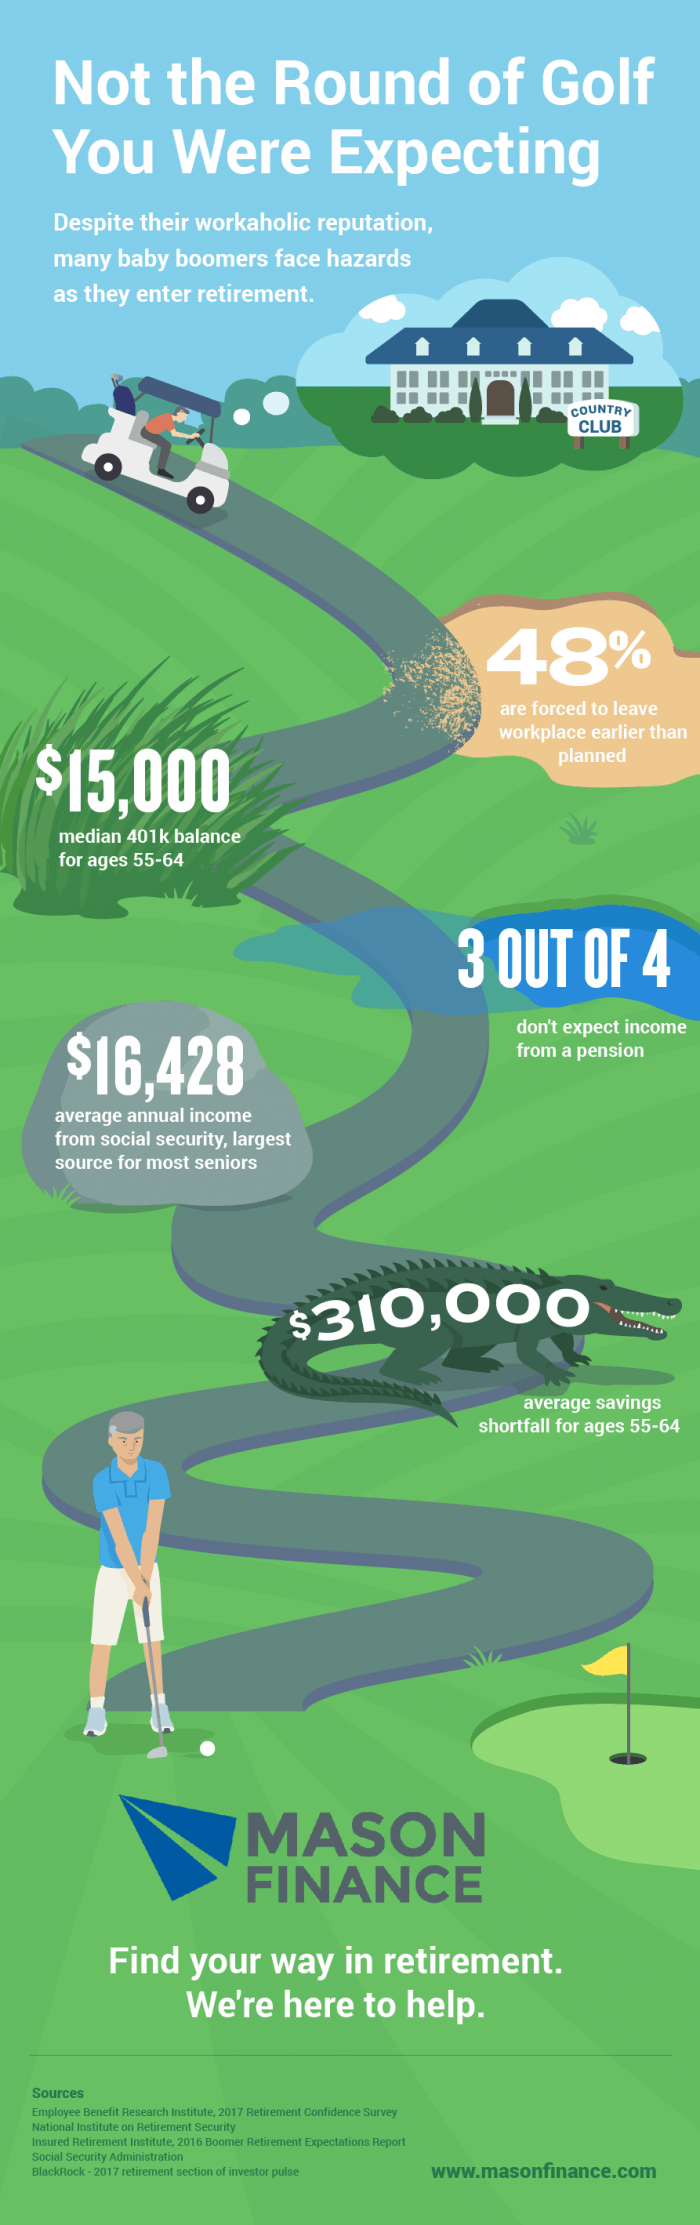 infographic describes the potential pitfalls of retirement